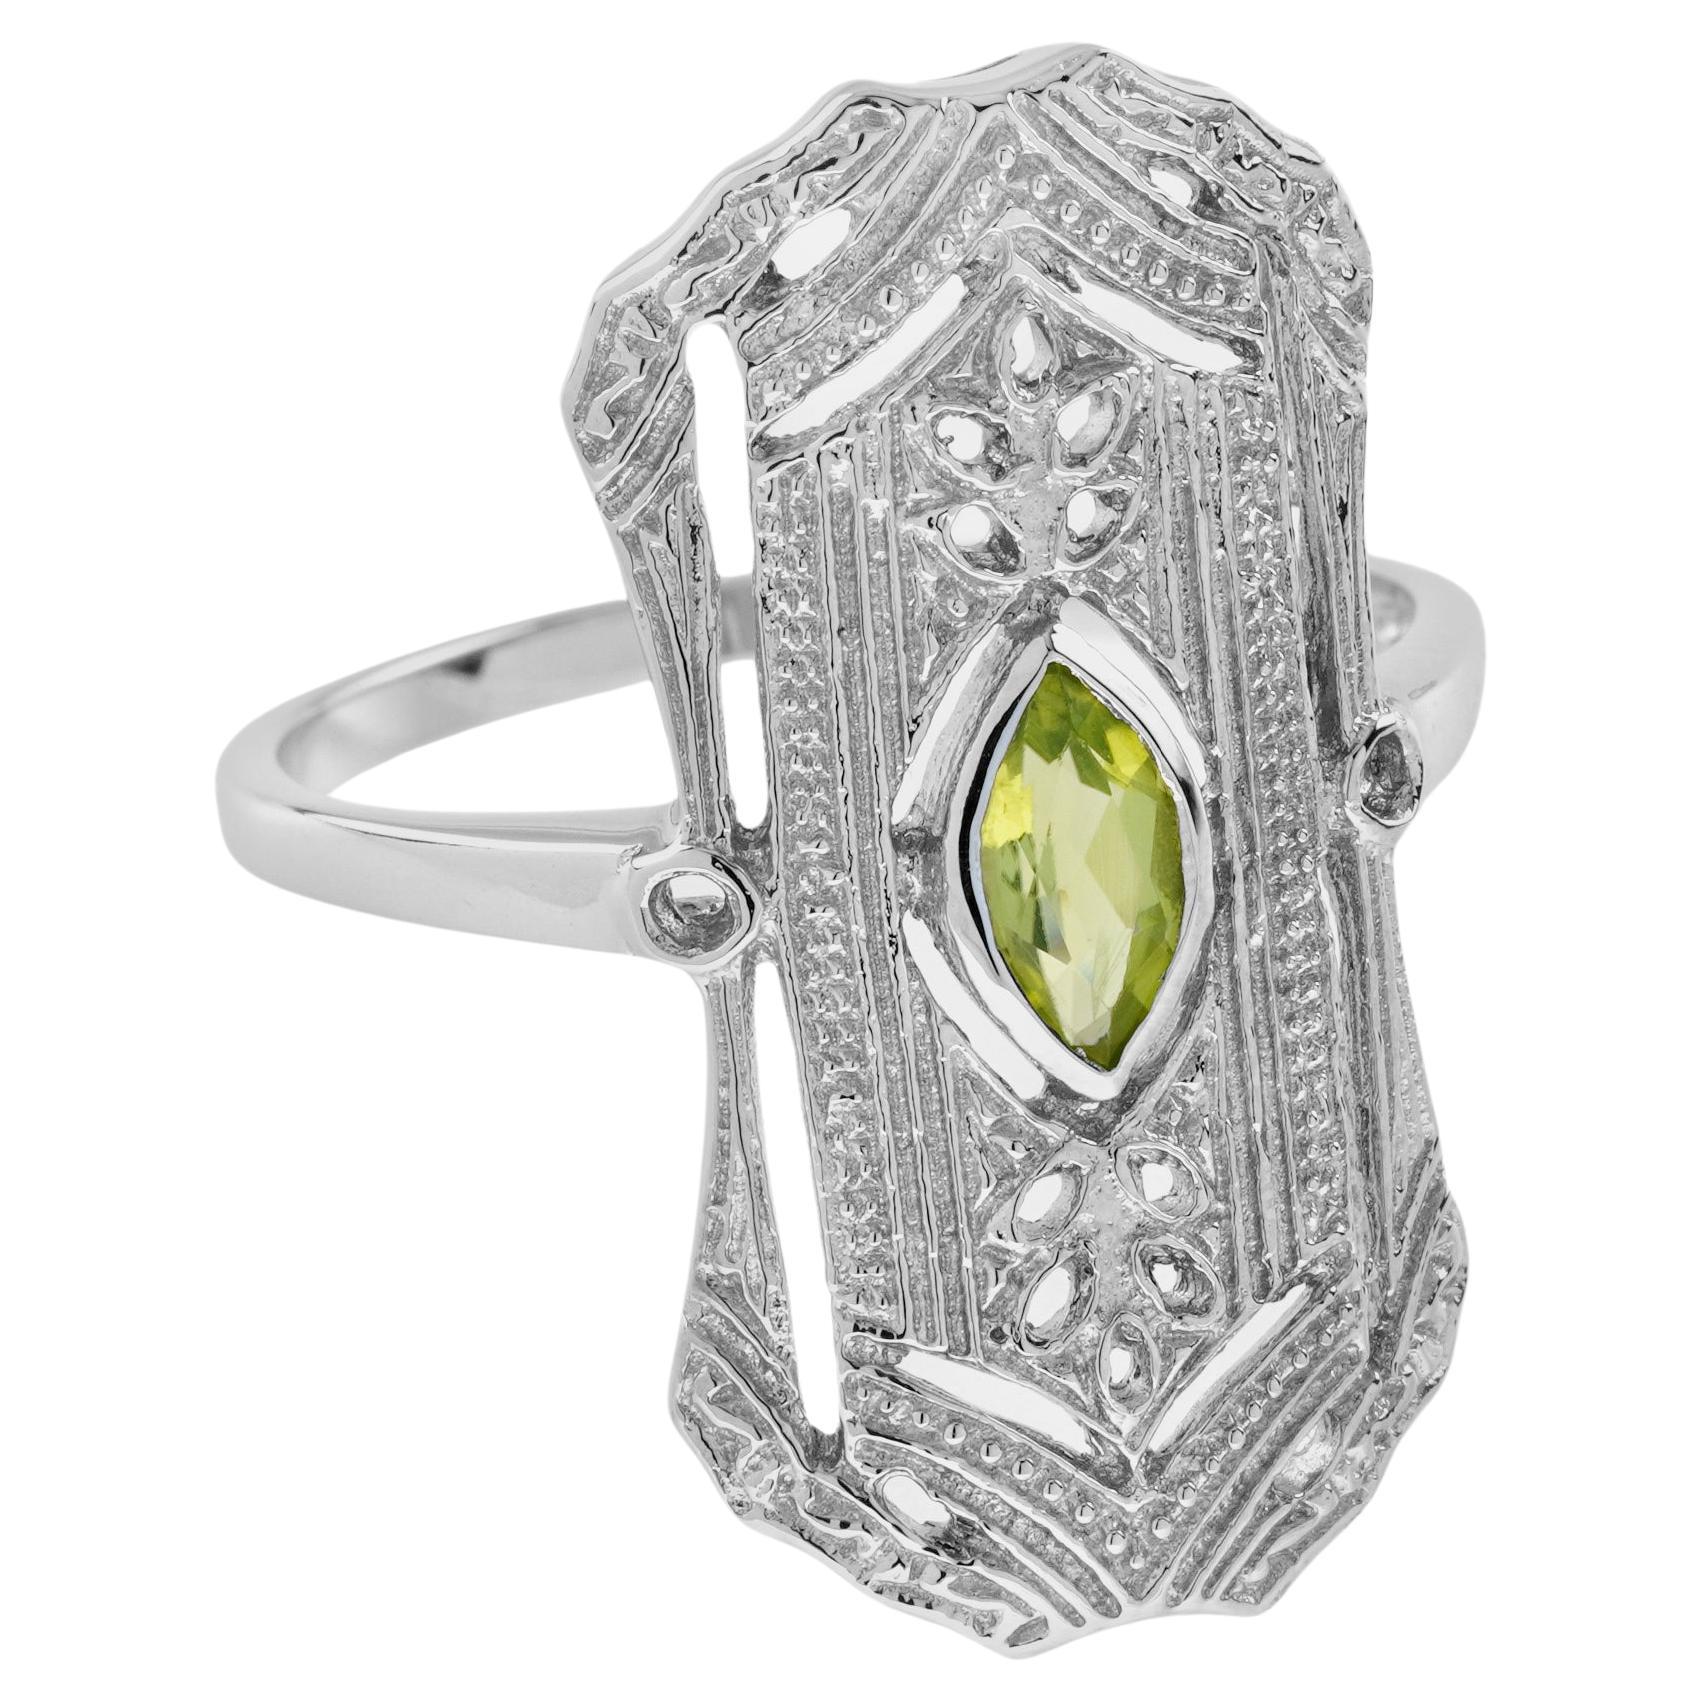 For Sale:  Natural Marquise Peridot Vintage Style Dinner Ring in Solid 9K White Gold